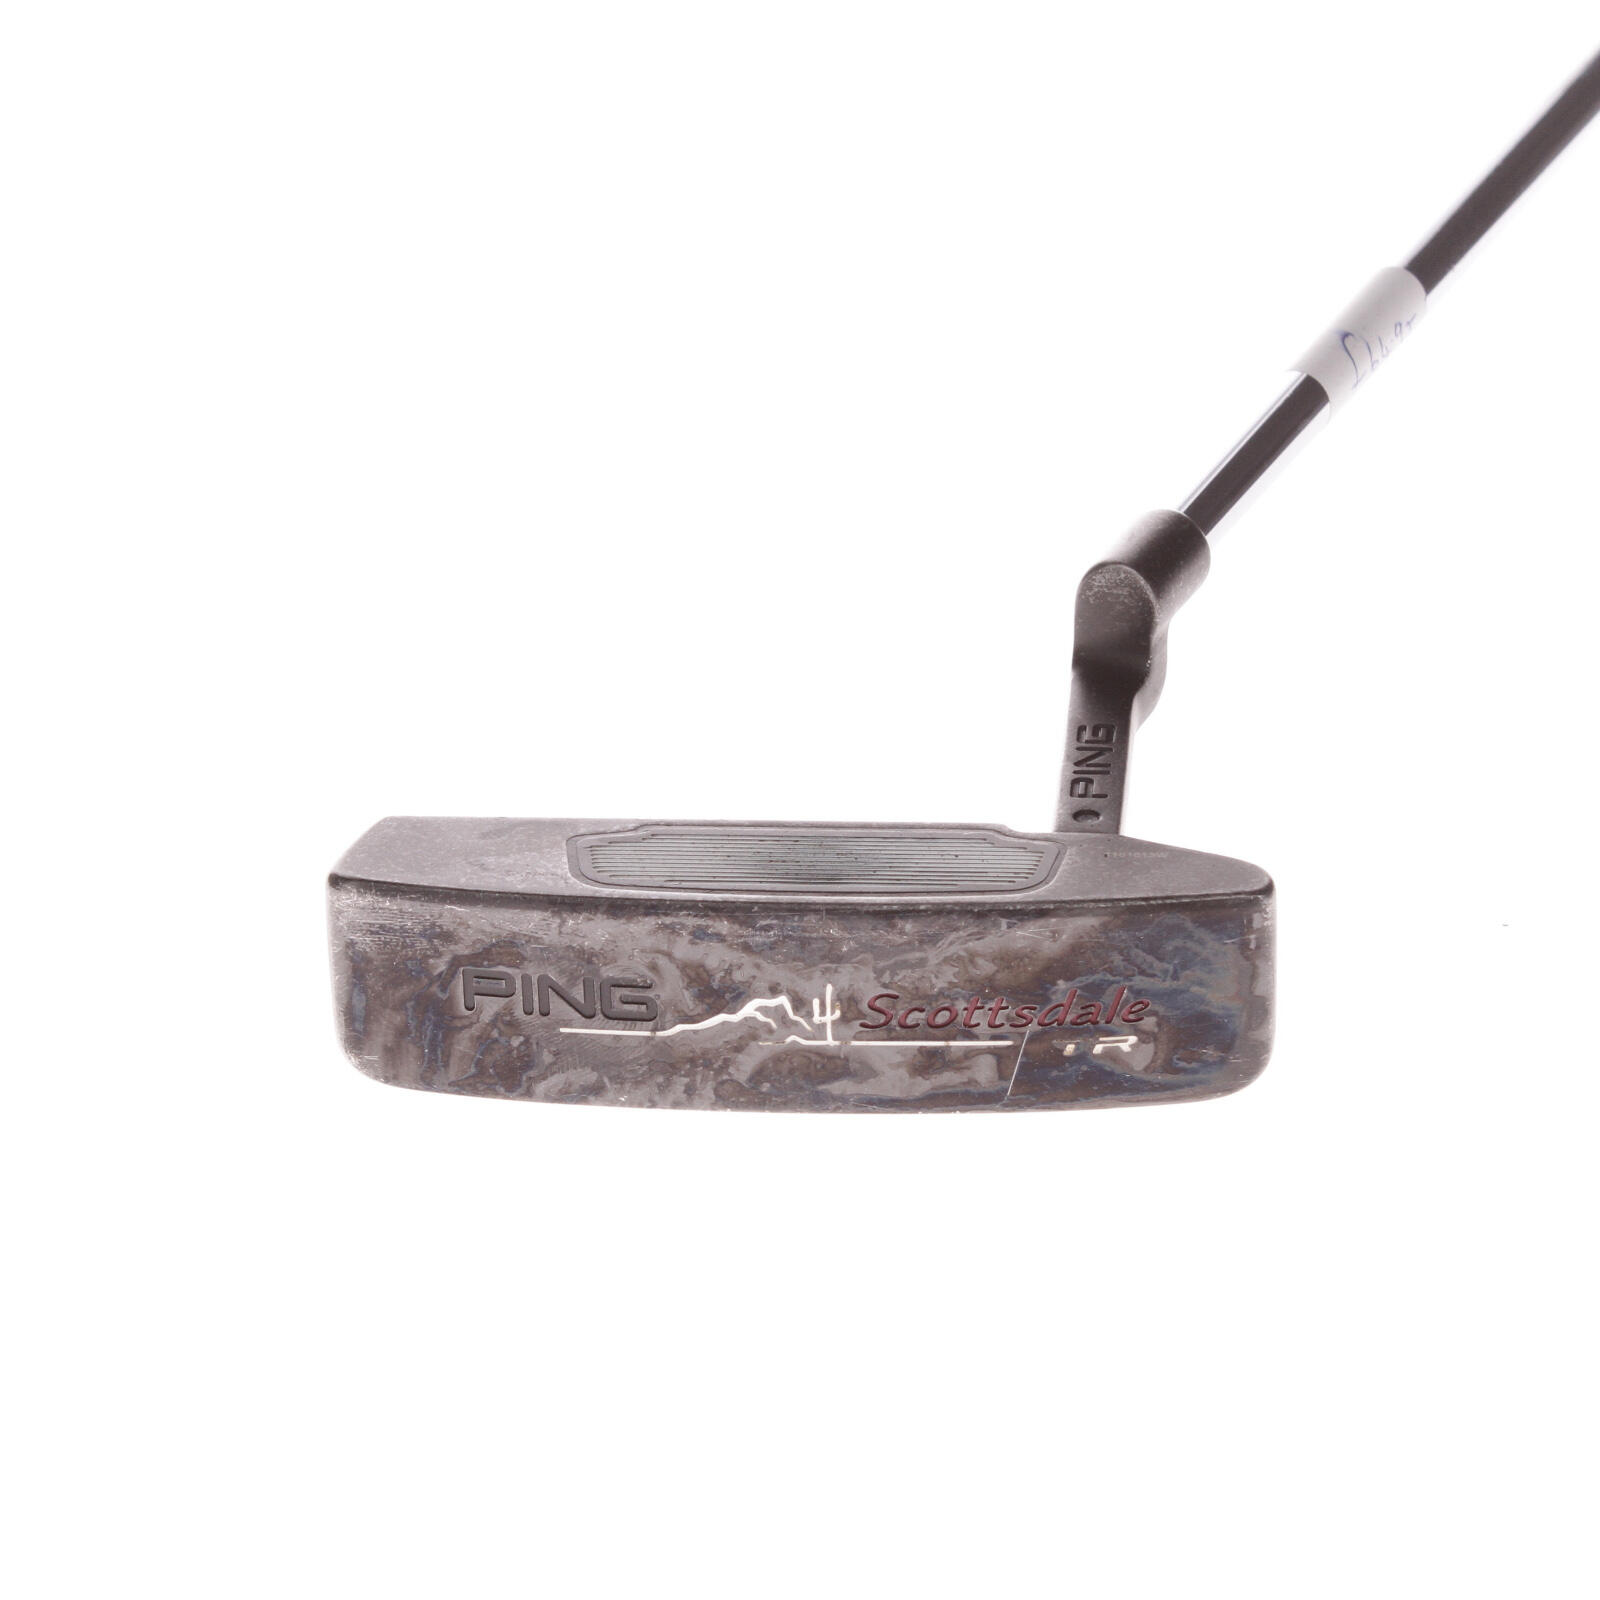 PING USED - Ping Scottsdale TR Putter 33.5 Inches Steel Shaft Right Handed - GRADE C